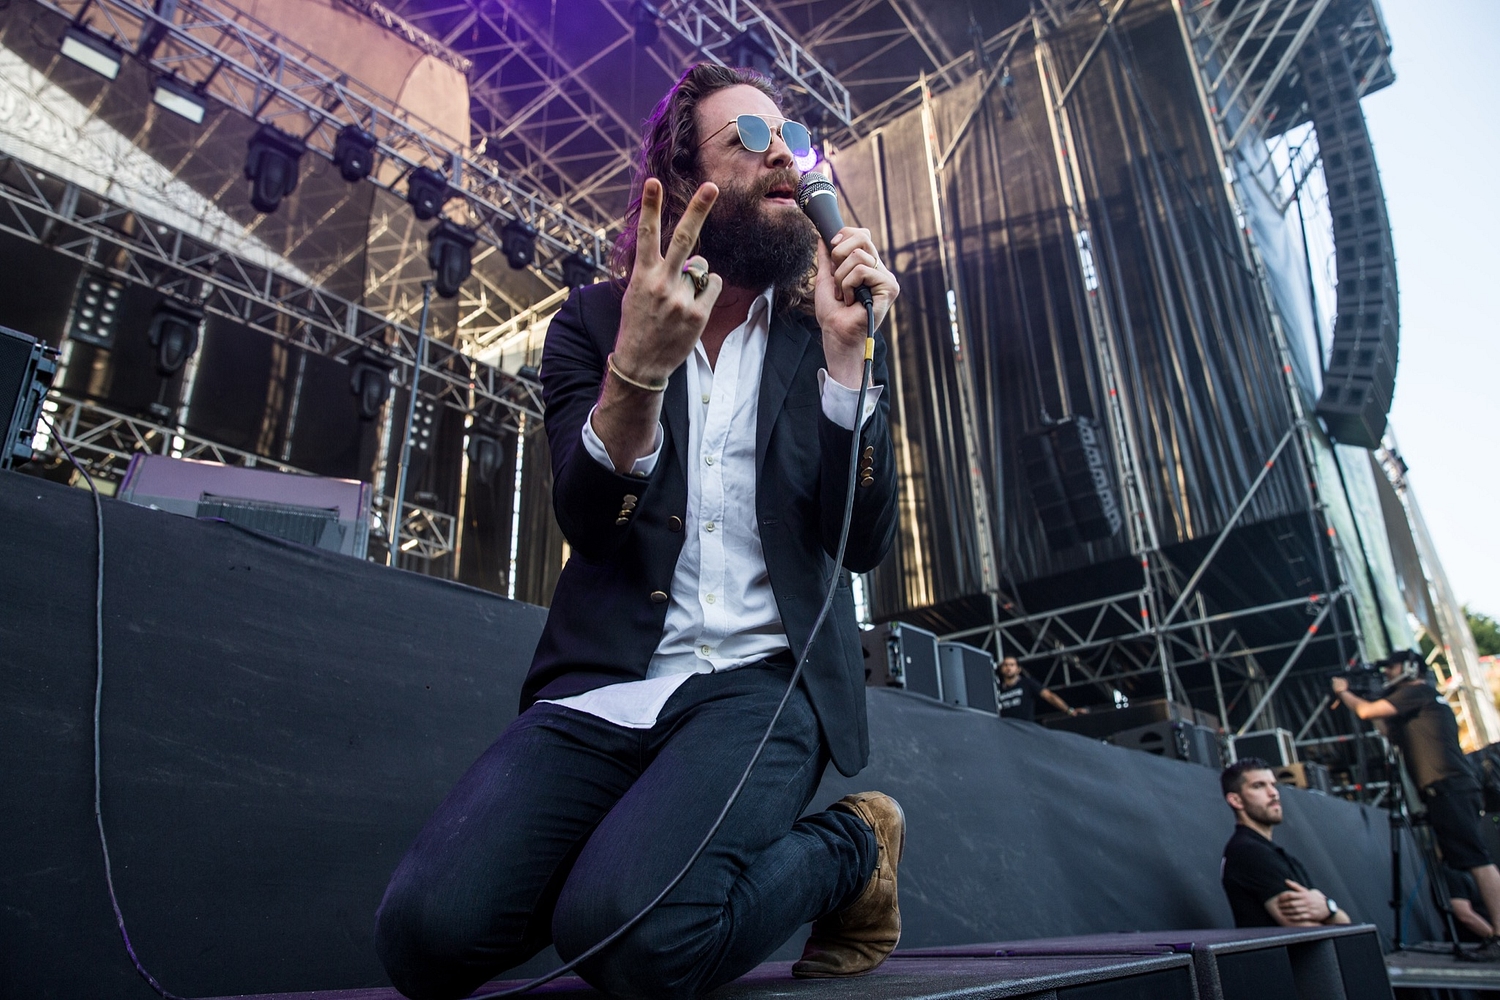 Father John Misty previewed his new album in Seattle this weekend